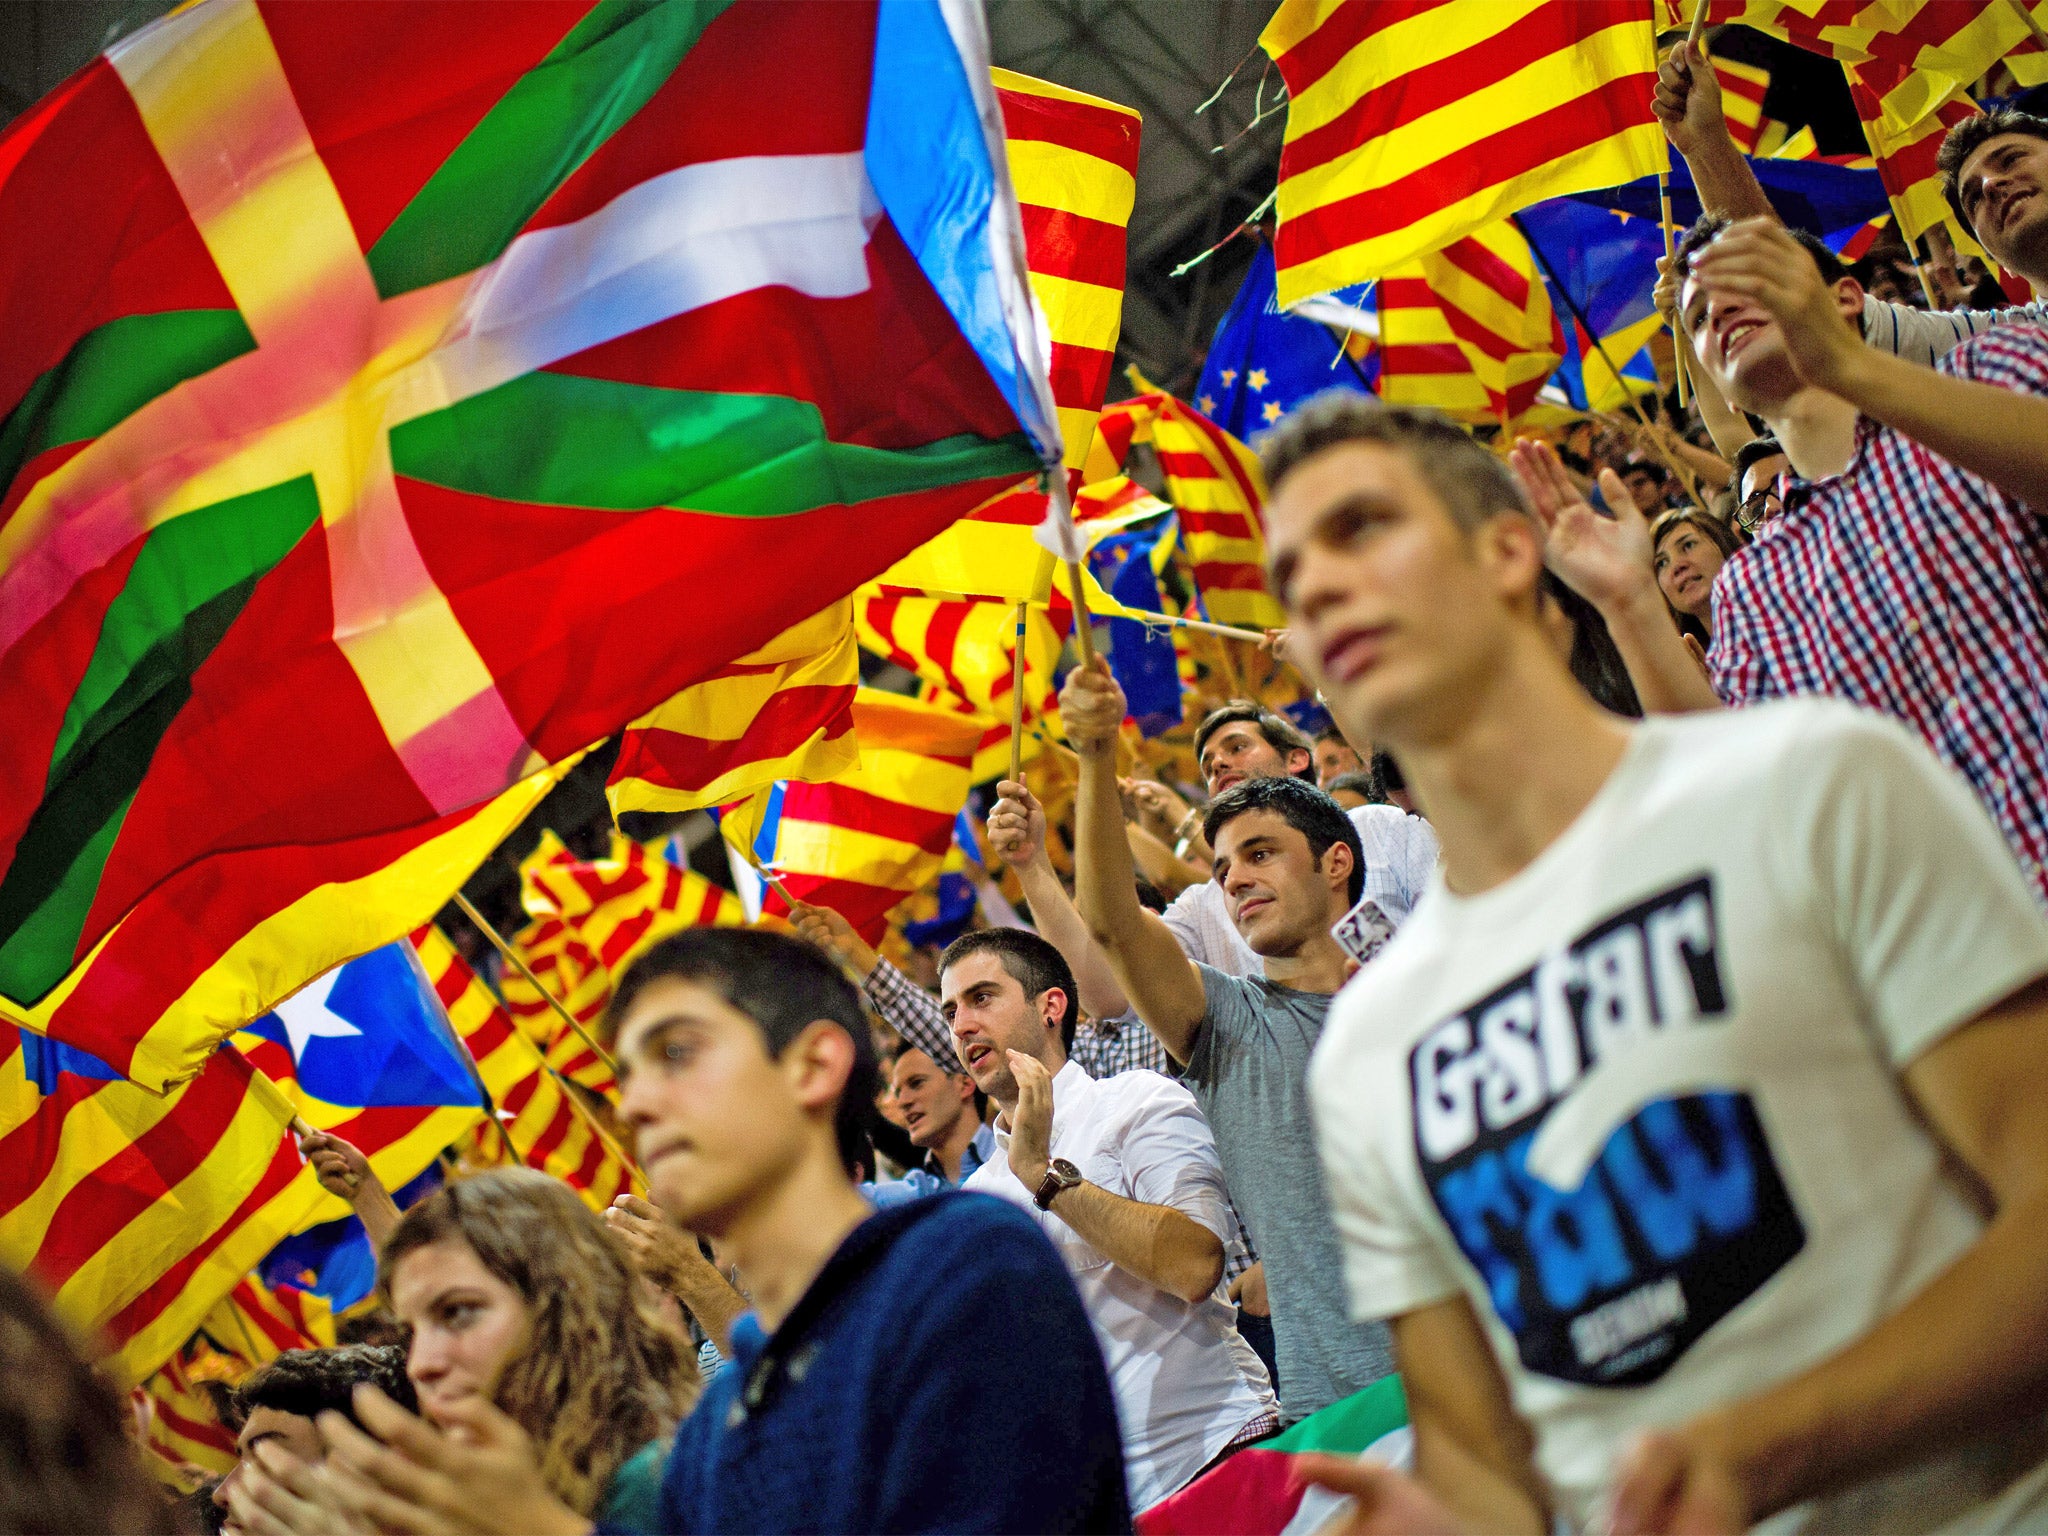 Supporters of the Pro-independence Catalan party Convergence and Union (CIU) fly a Basque Country flag